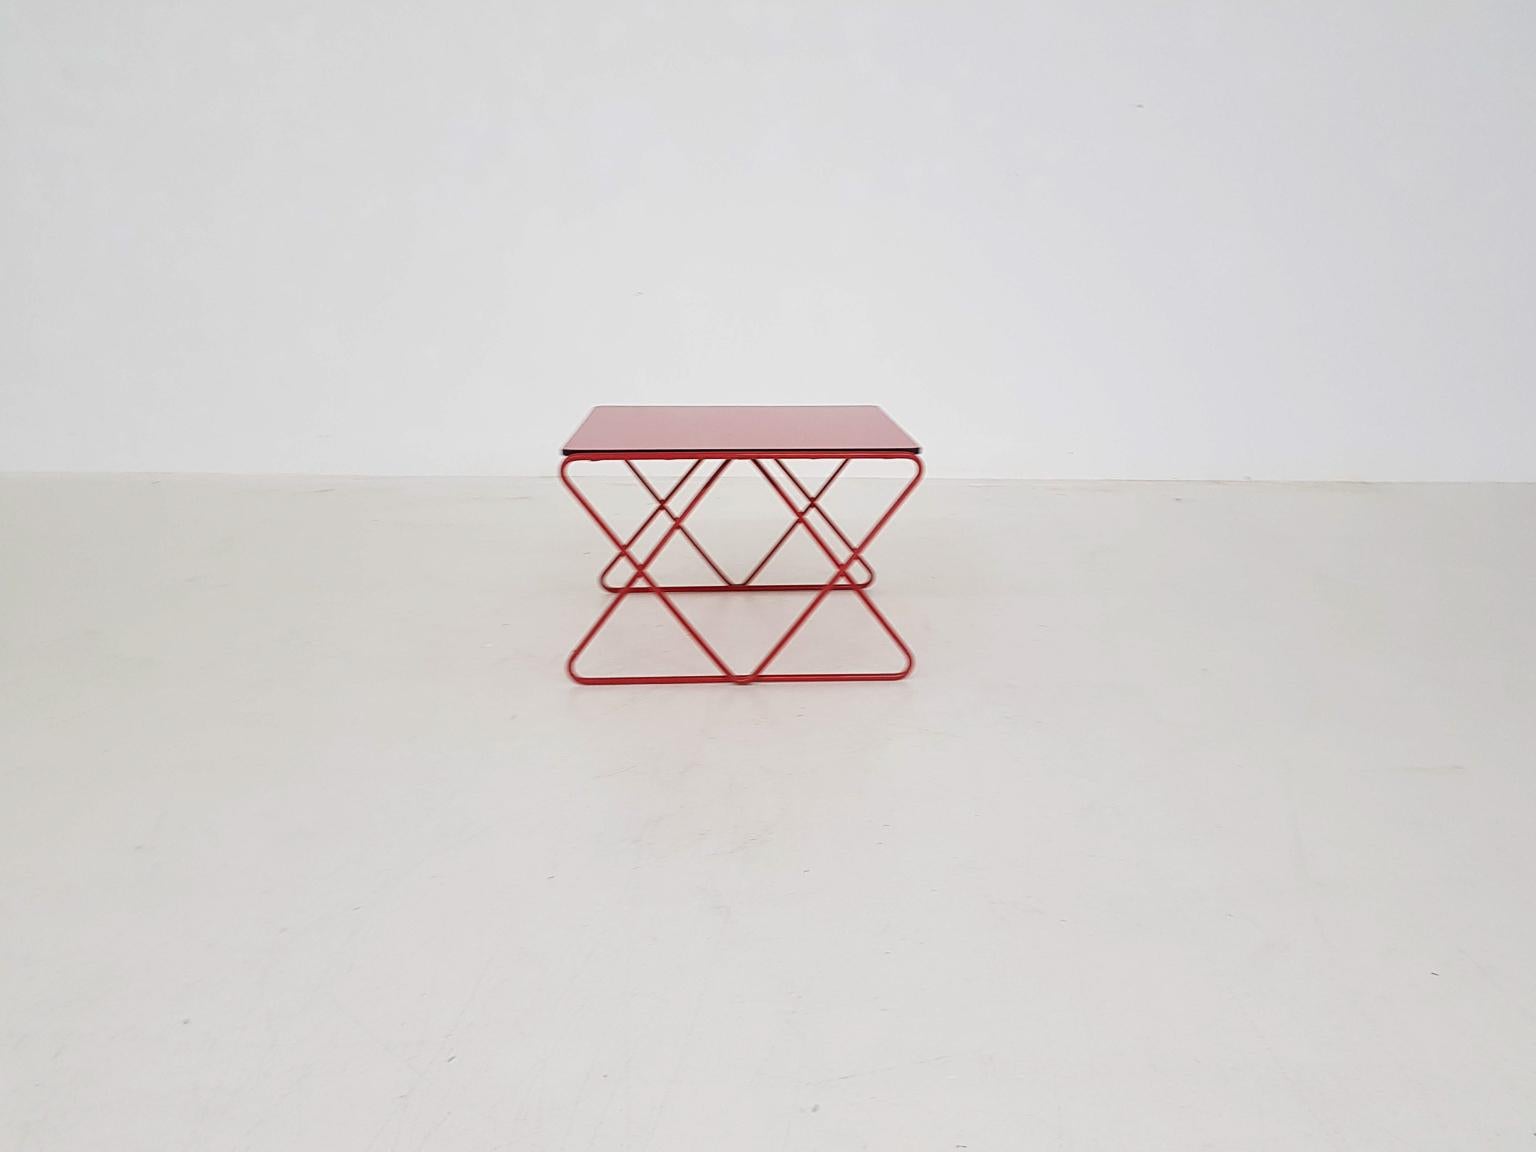 Rare Walter Antonis for I-form coffee table, Dutch design 1978.

Walter Antonis designed this table for his own firm I-form. Not many were made (estimated 40 pieces). Very rare piece of Dutch design.

Red metal frame and red formica top.

In